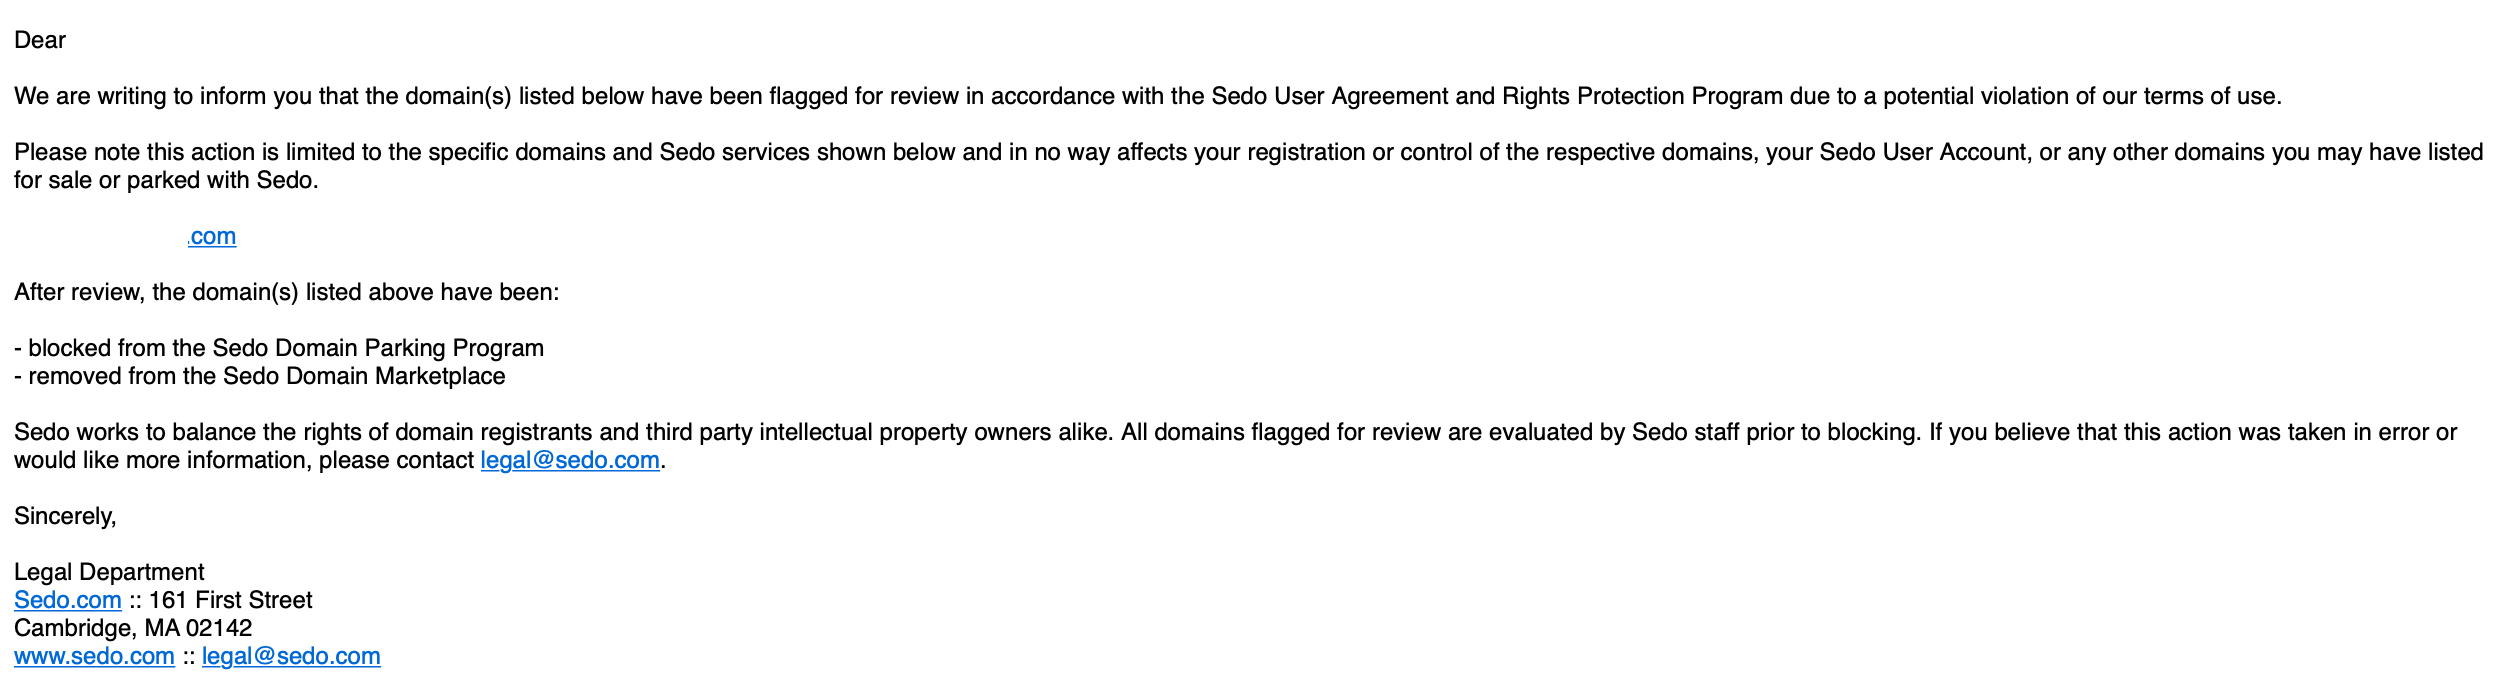 Sedo Legal Removal Flagged Domain